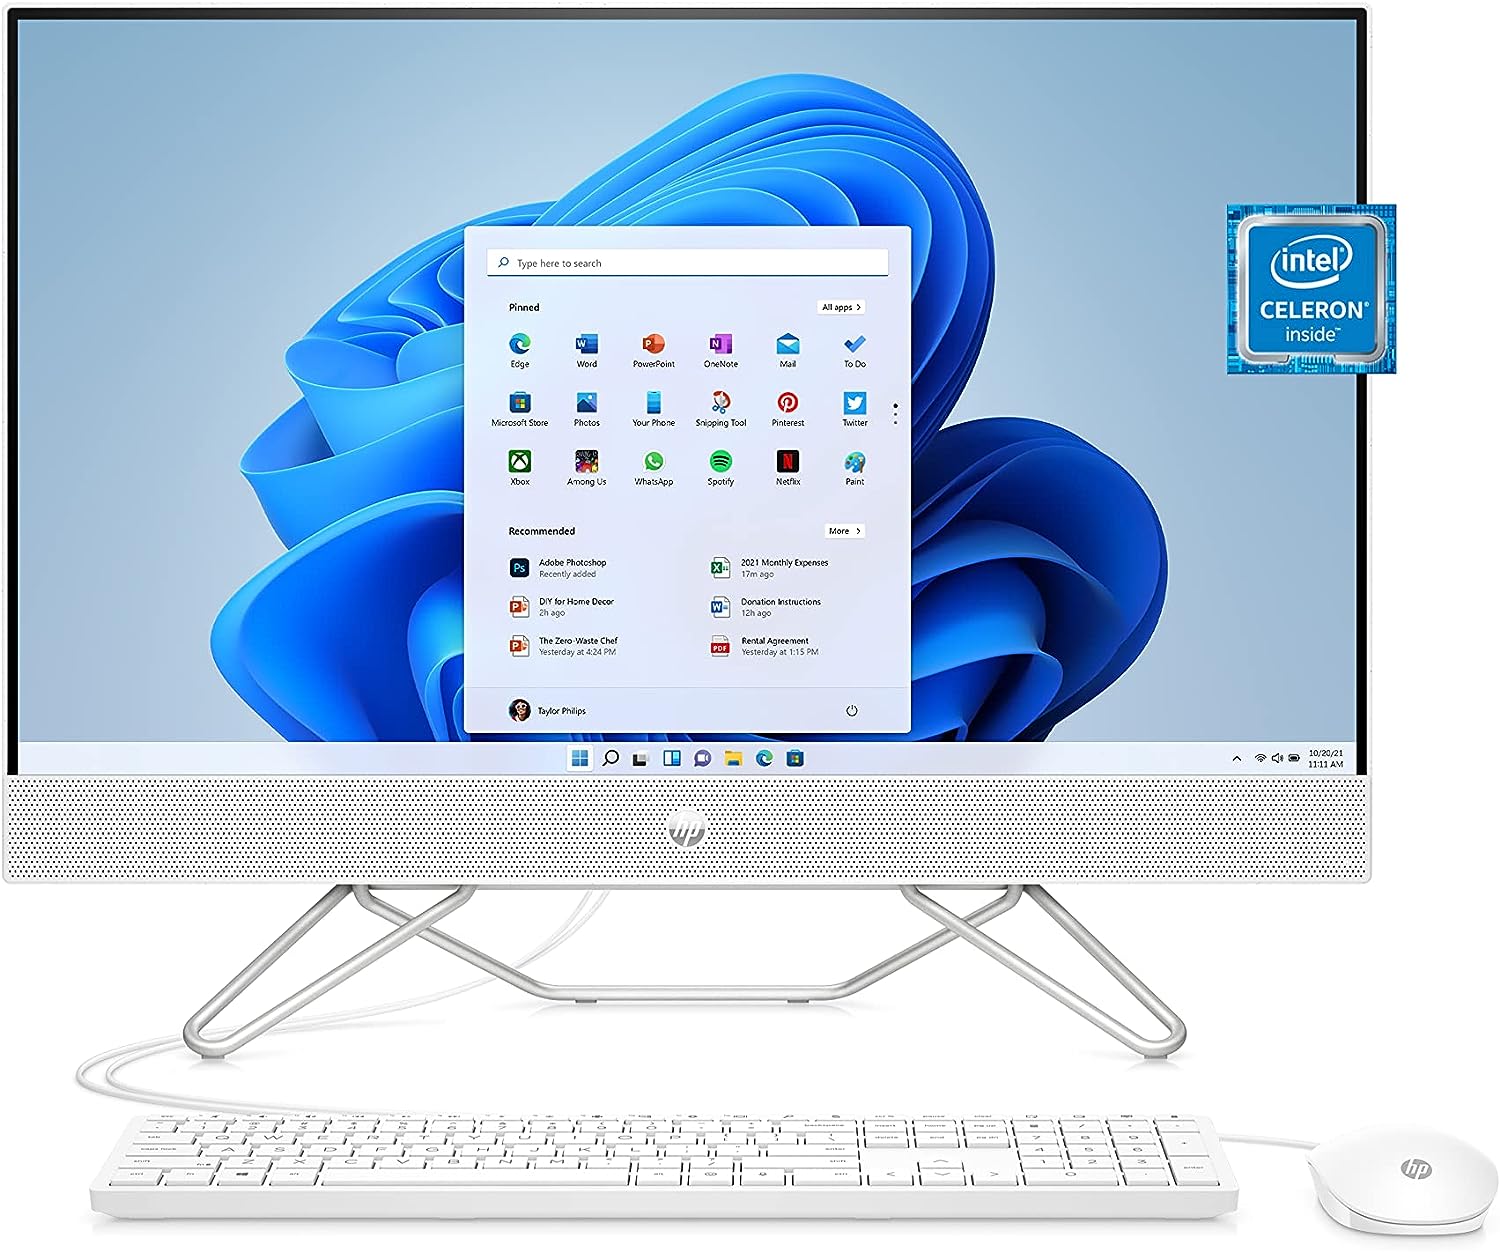 HP 24-cb0010 23.8” FHD All-in-One Desktop PC Review